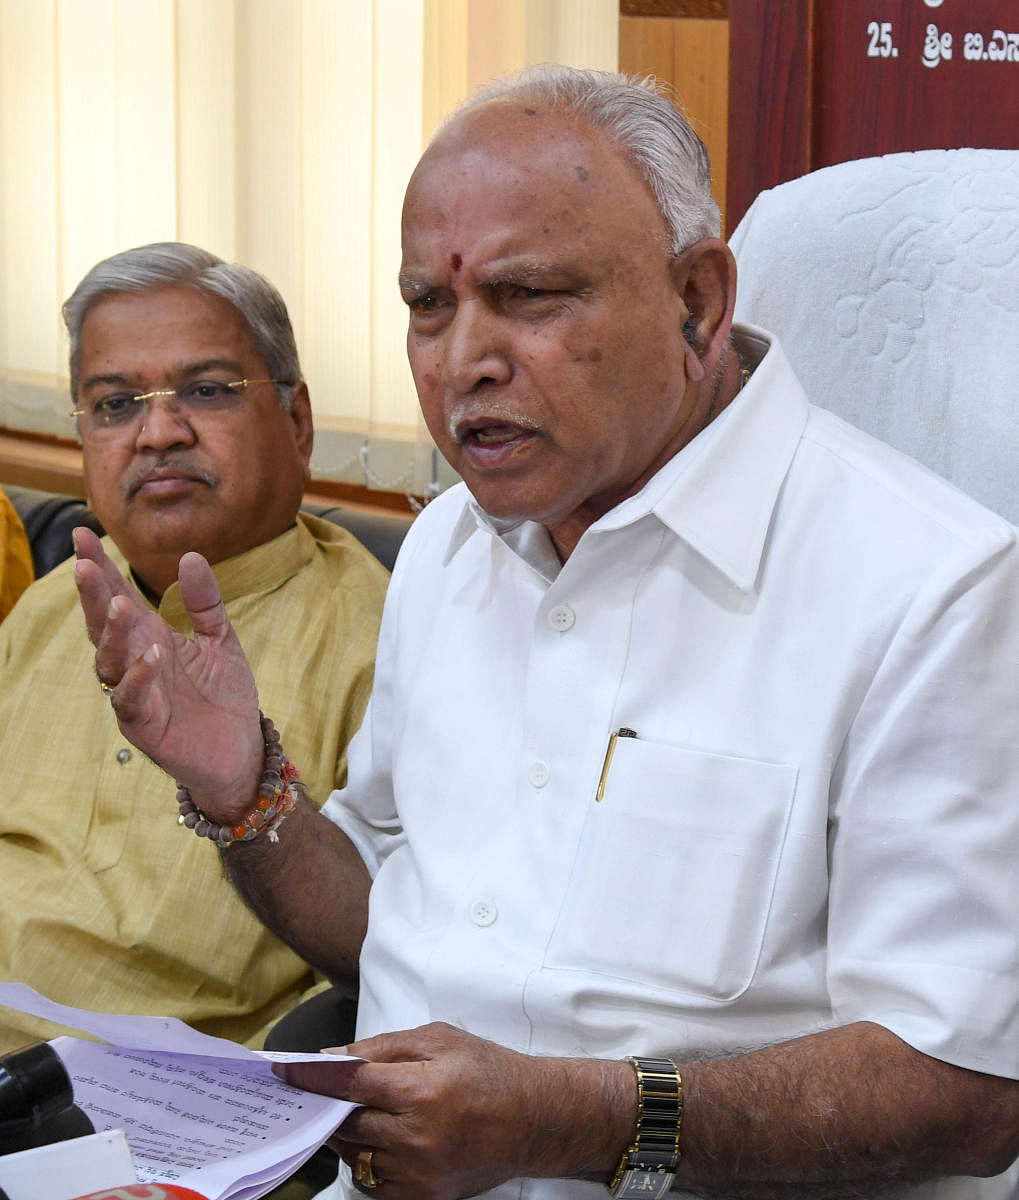 "I demand that the Chief Minister if he is honest and cares for the democratic system, he should immediately resign or should move a motion seeking for trust vote on Monday itself," state BJP chief B S Yeddyurappa said. (DH File Photo)